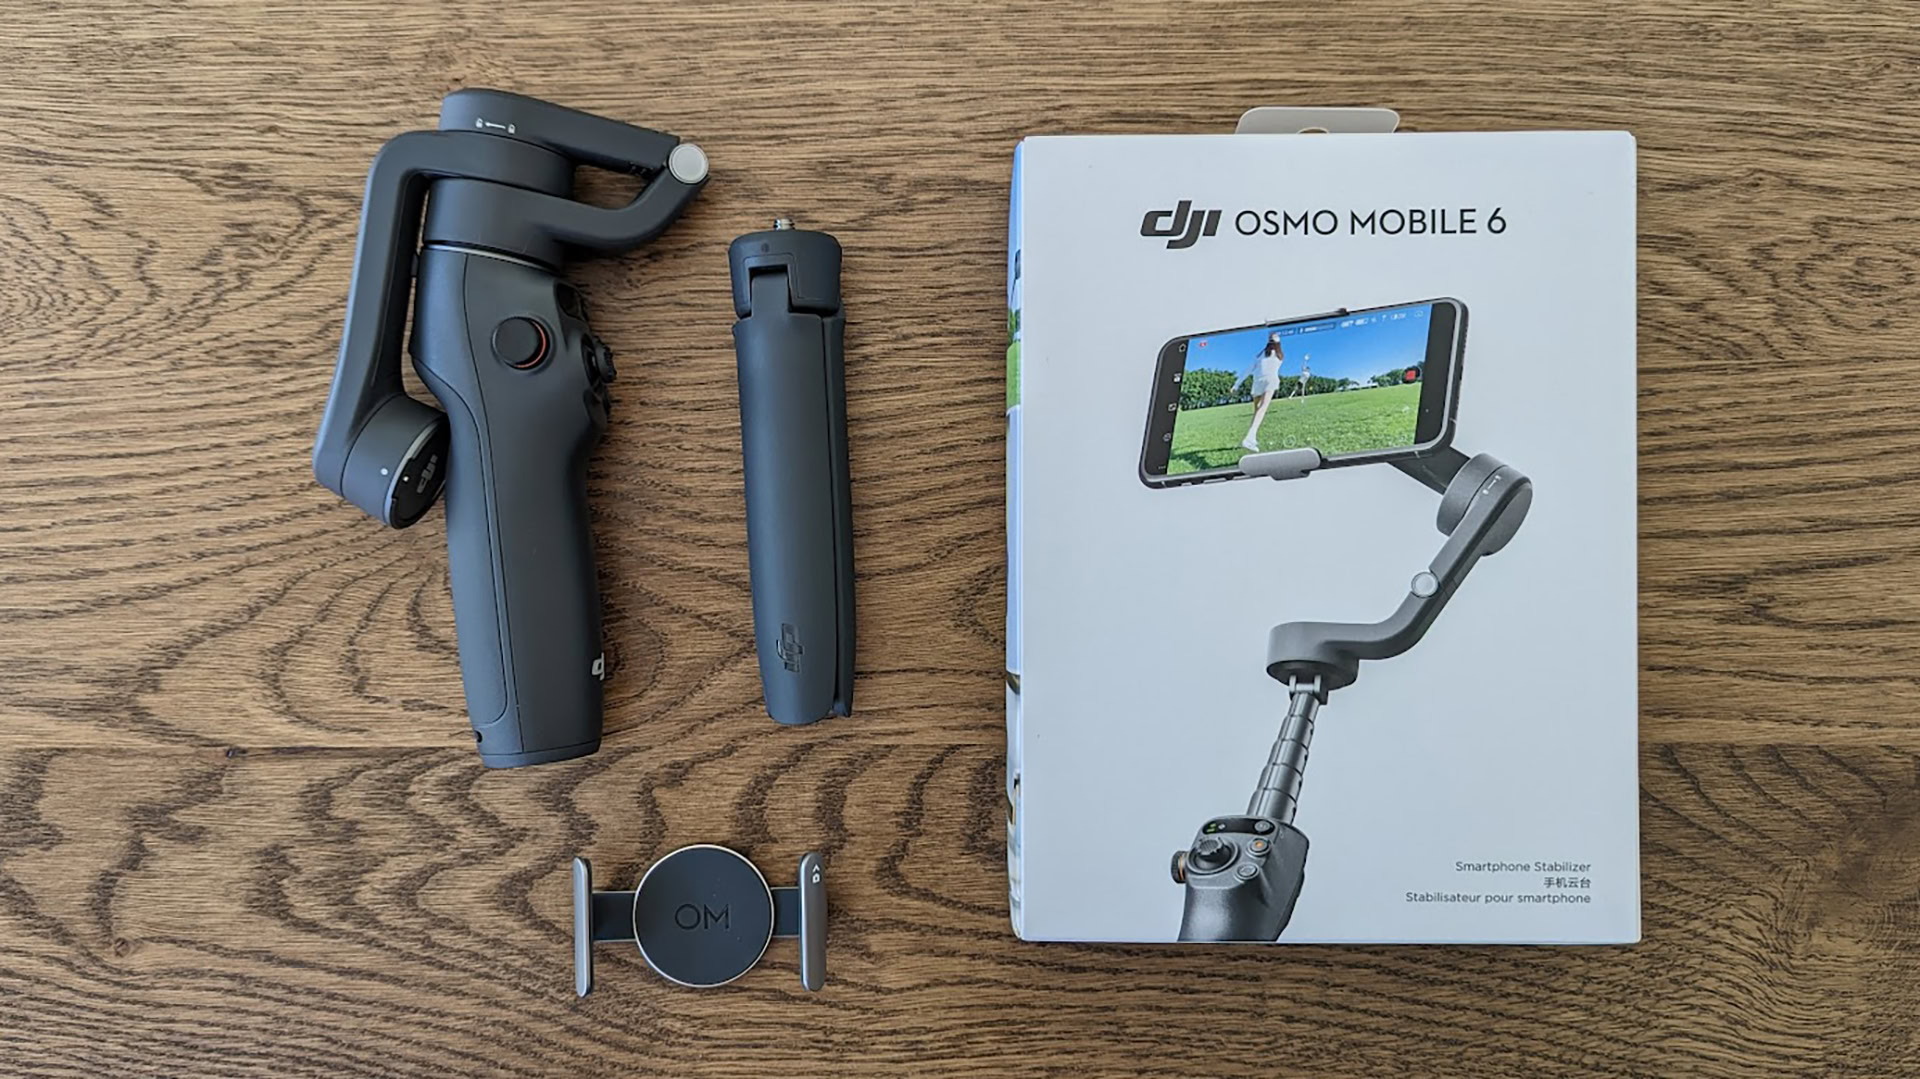 DJI Osmo Mobile 6 review: The best smartphone gimbal gets even better